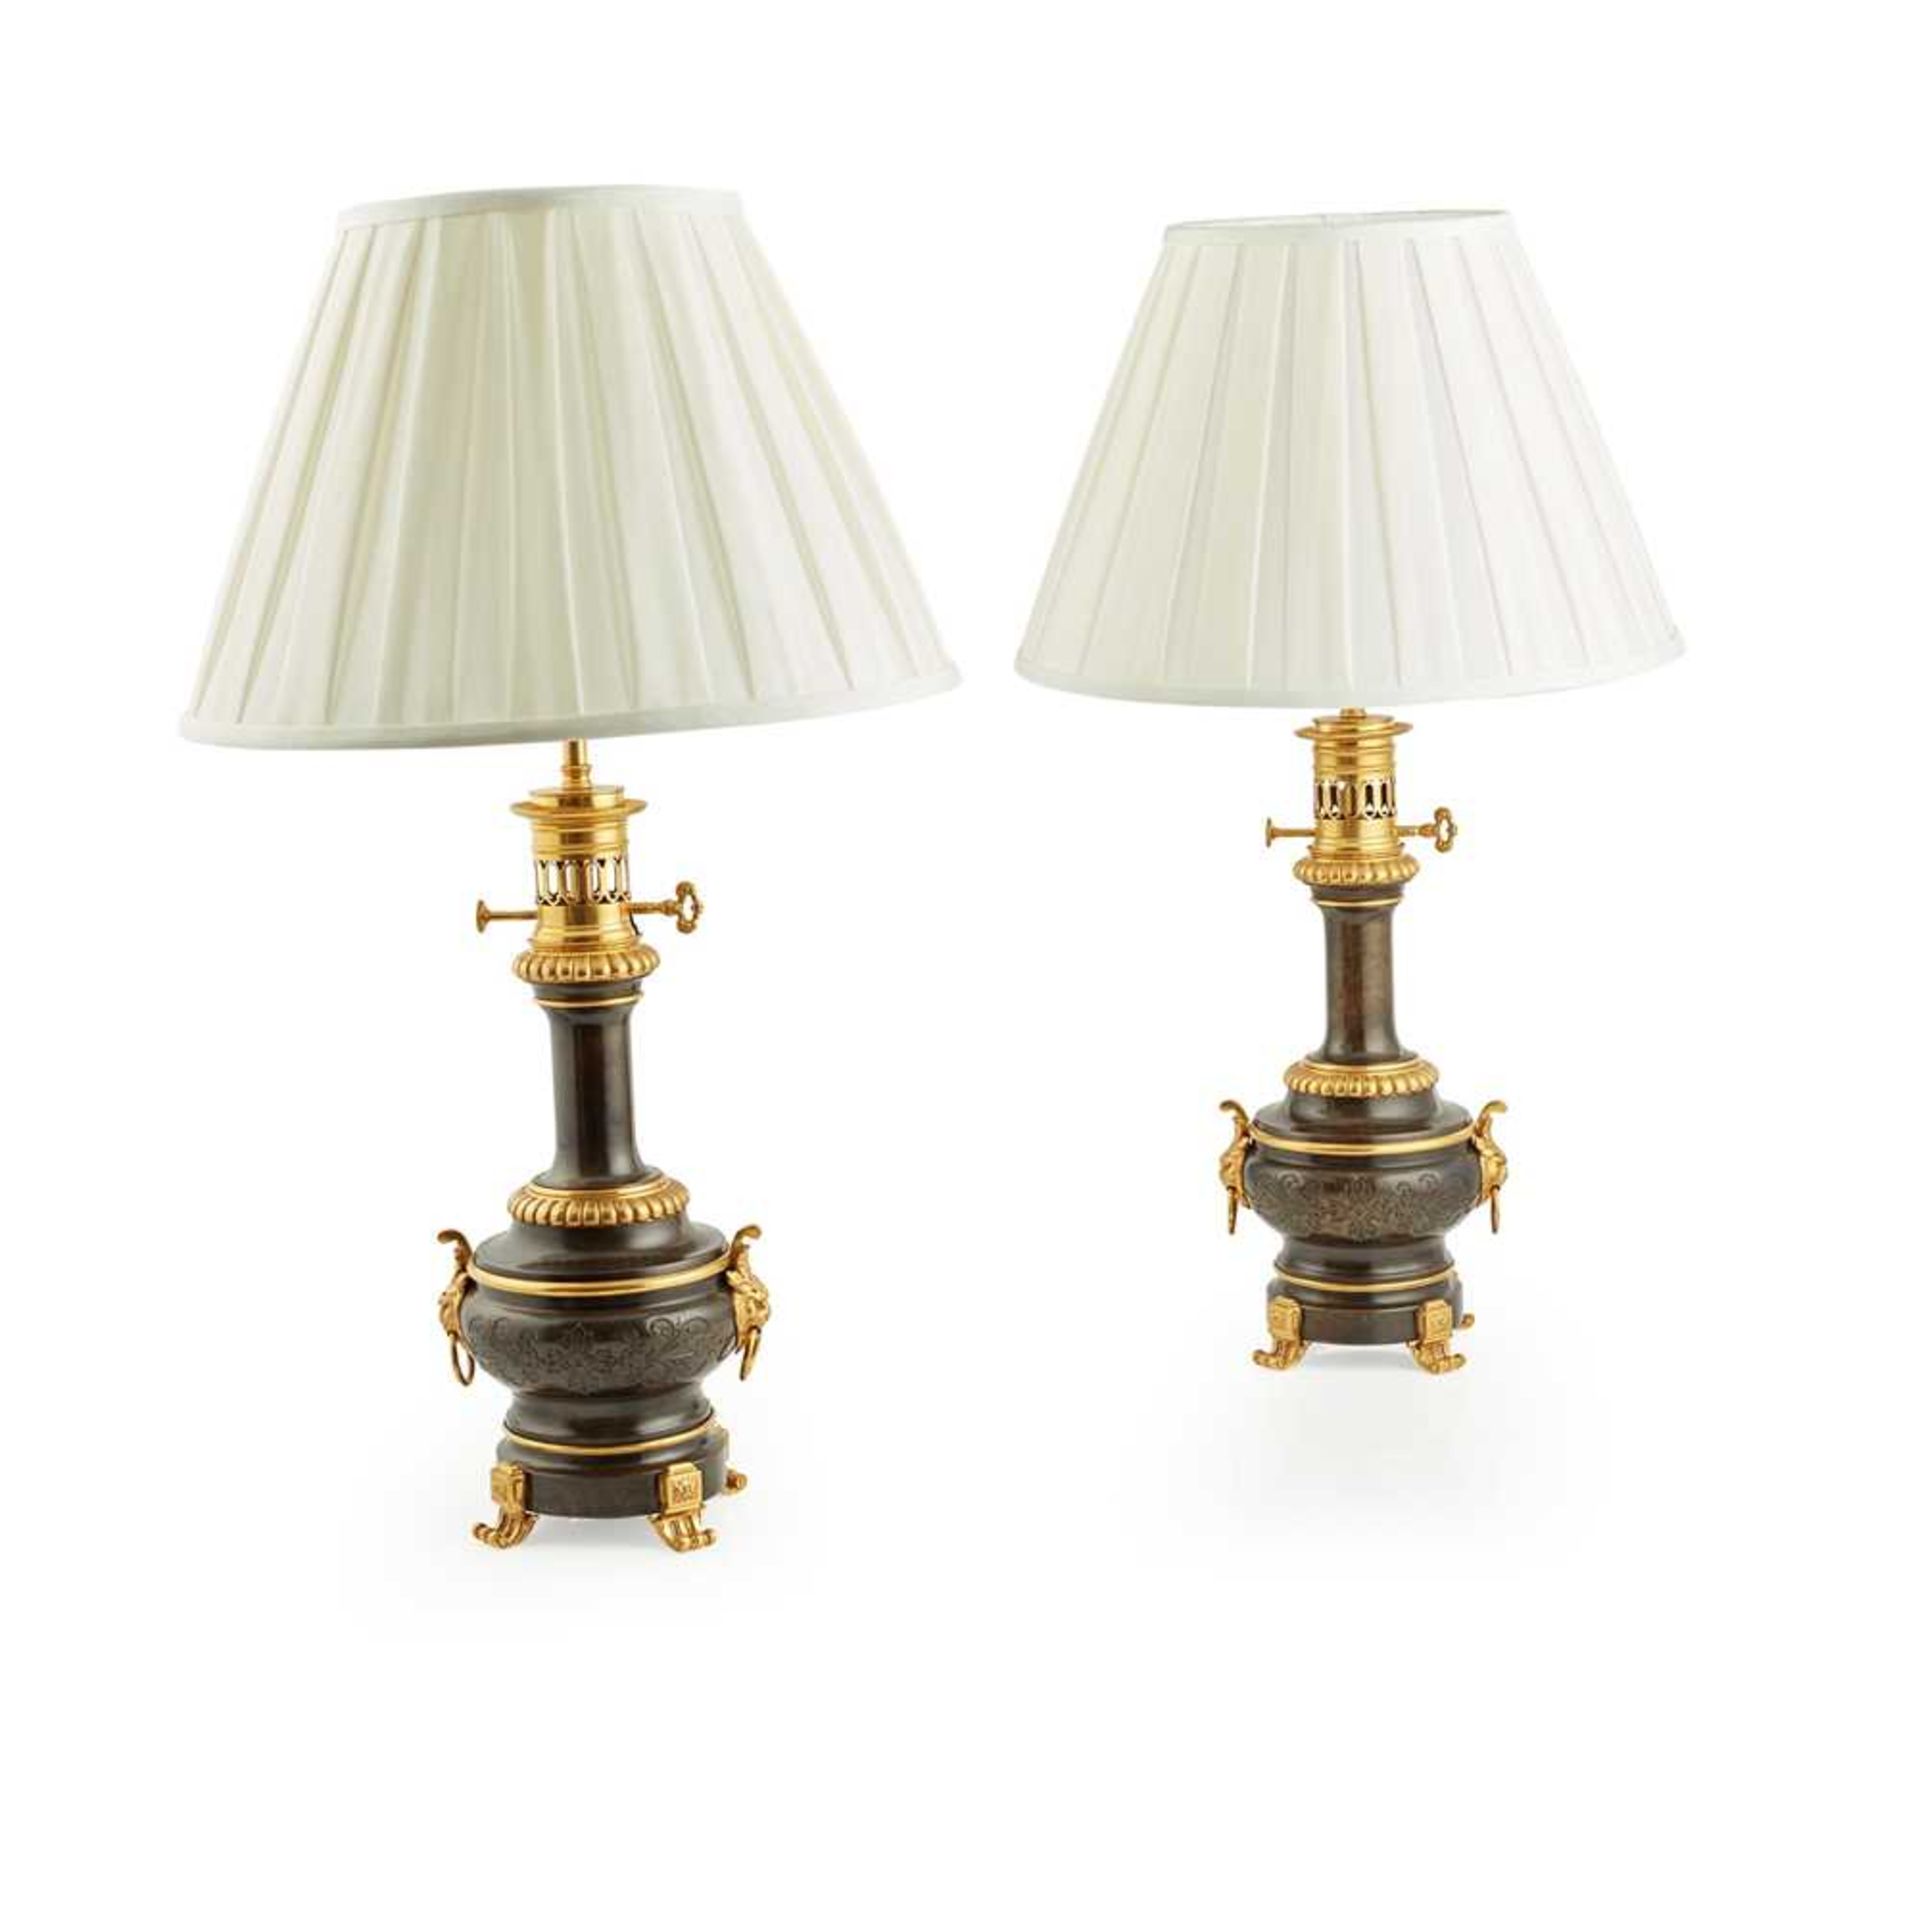 PAIR OF FRENCH PATINATED AND GILT METAL MODERATEUR LAMPS 19TH CENTURY